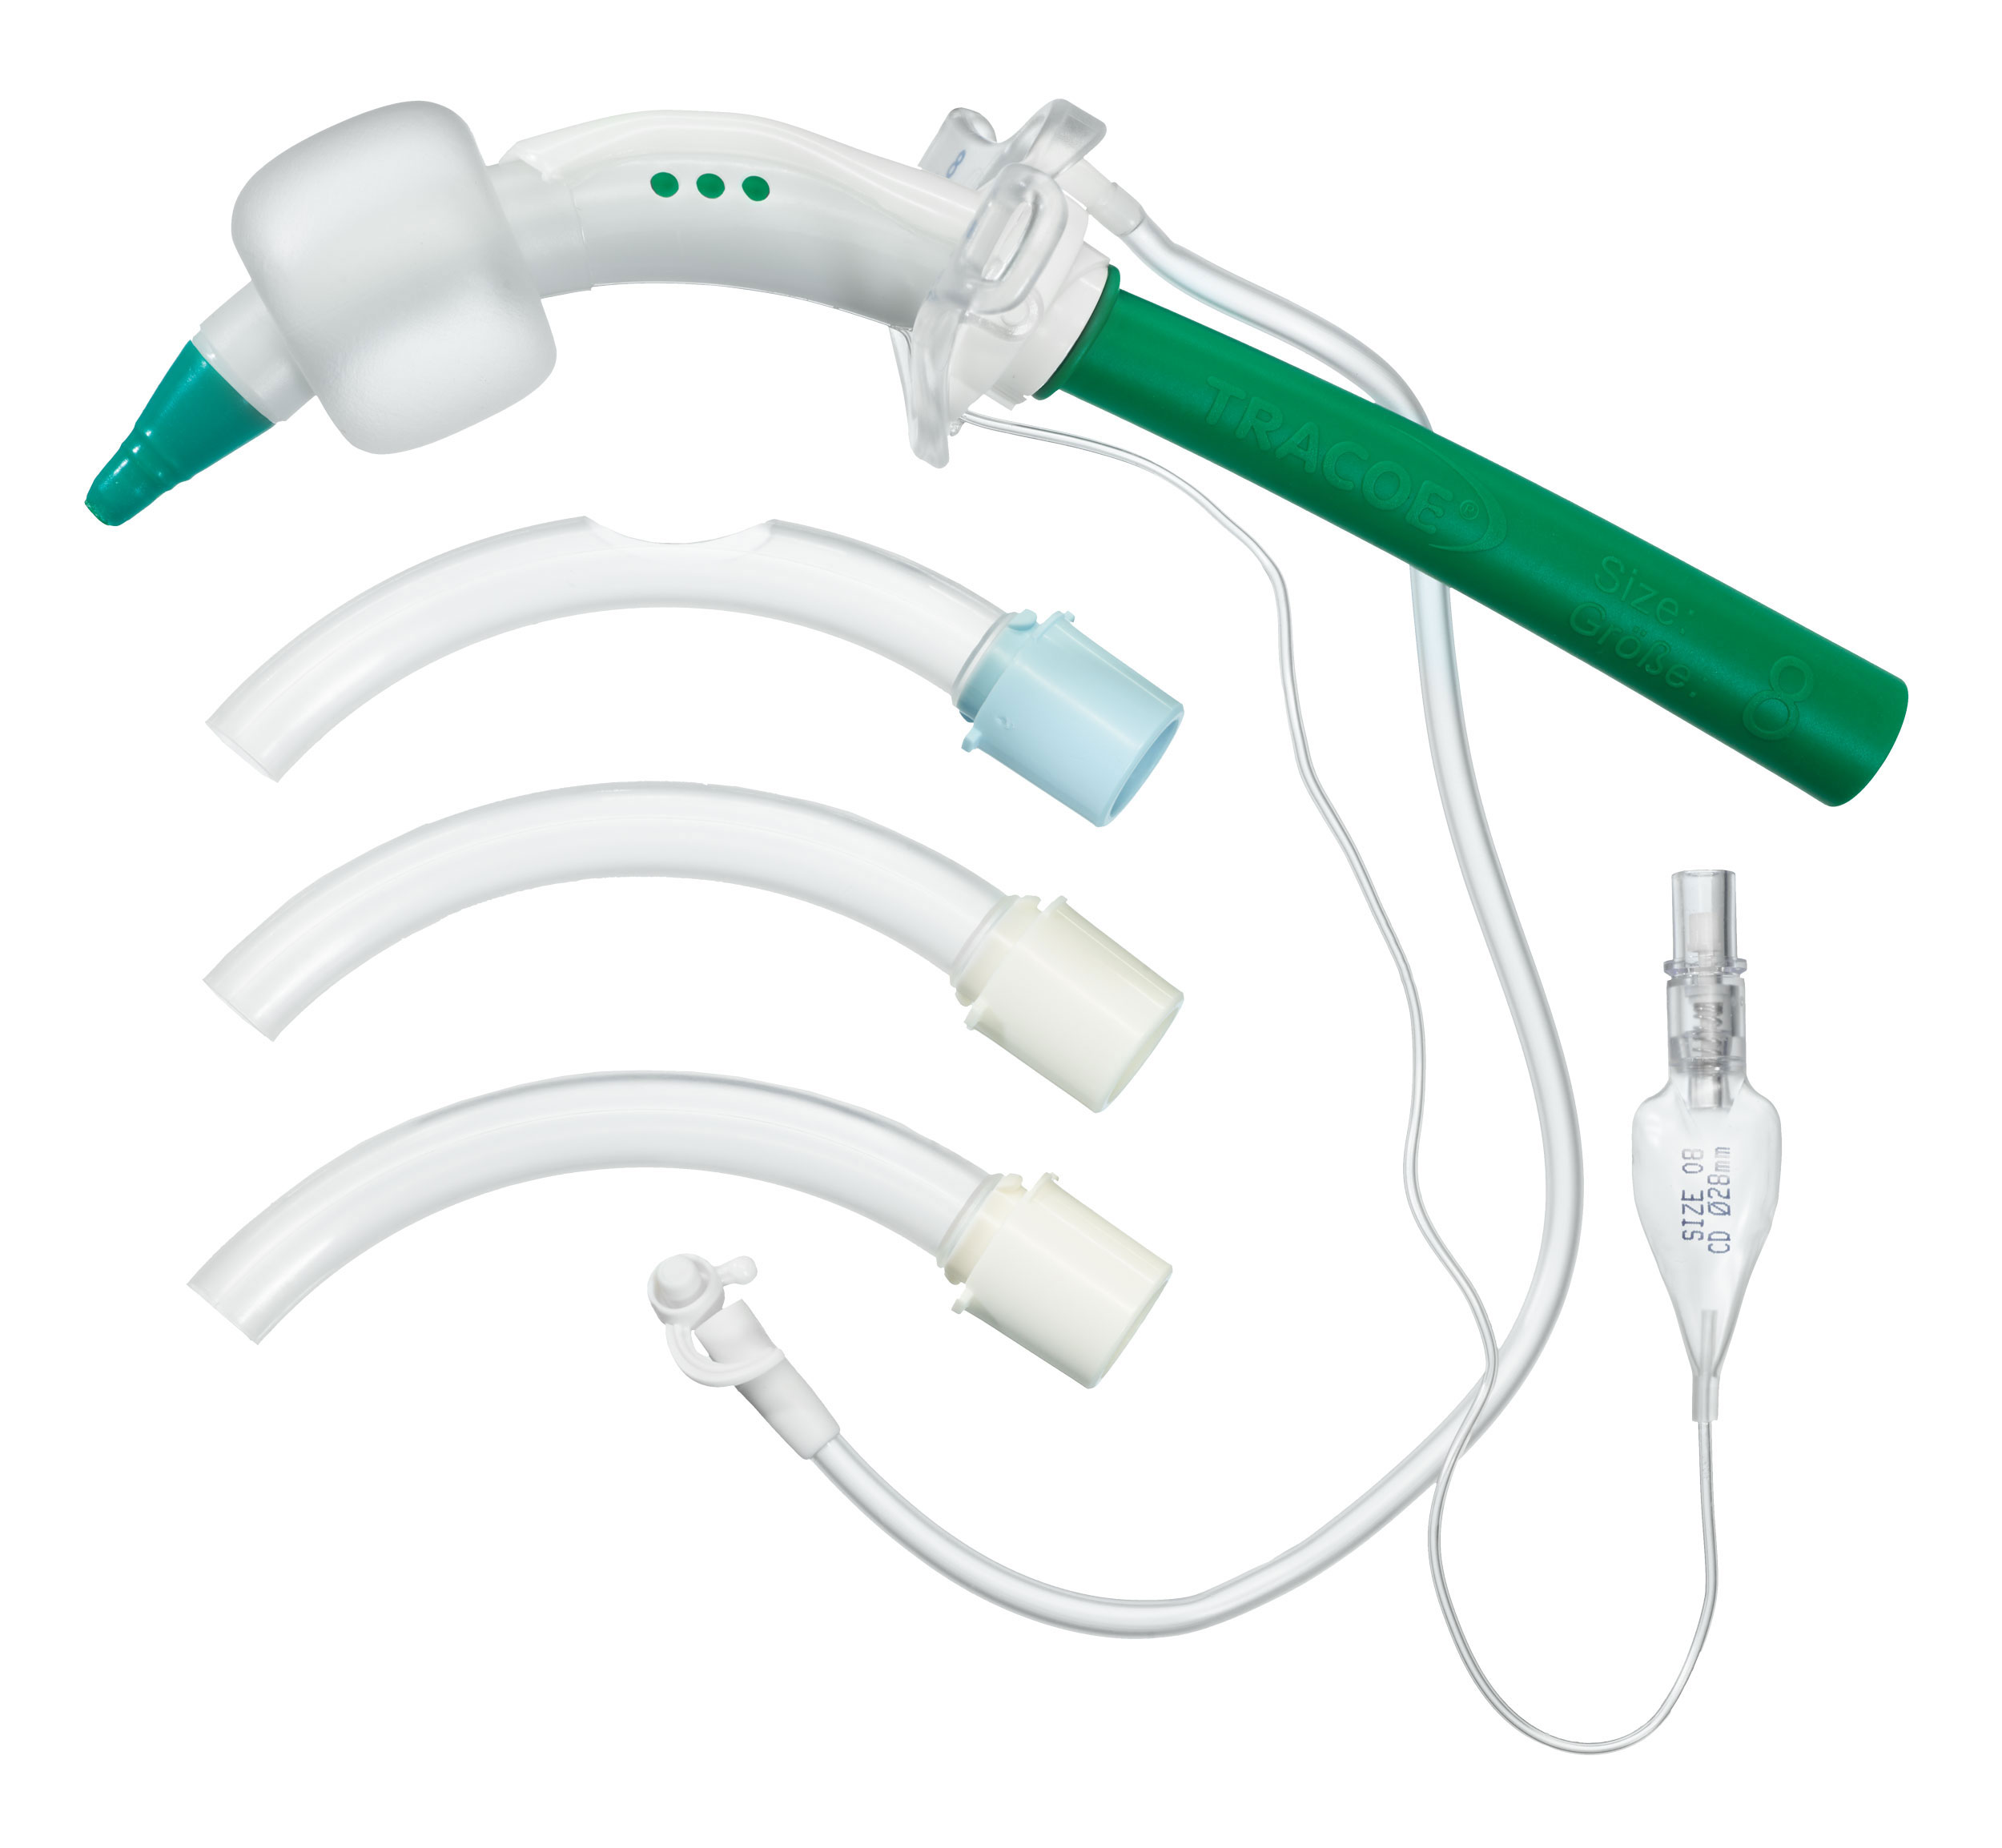 Dilation set + tracheostomy tube with low-pressure cuff, fenestration, subglottic suction and minimally traumatic inserter